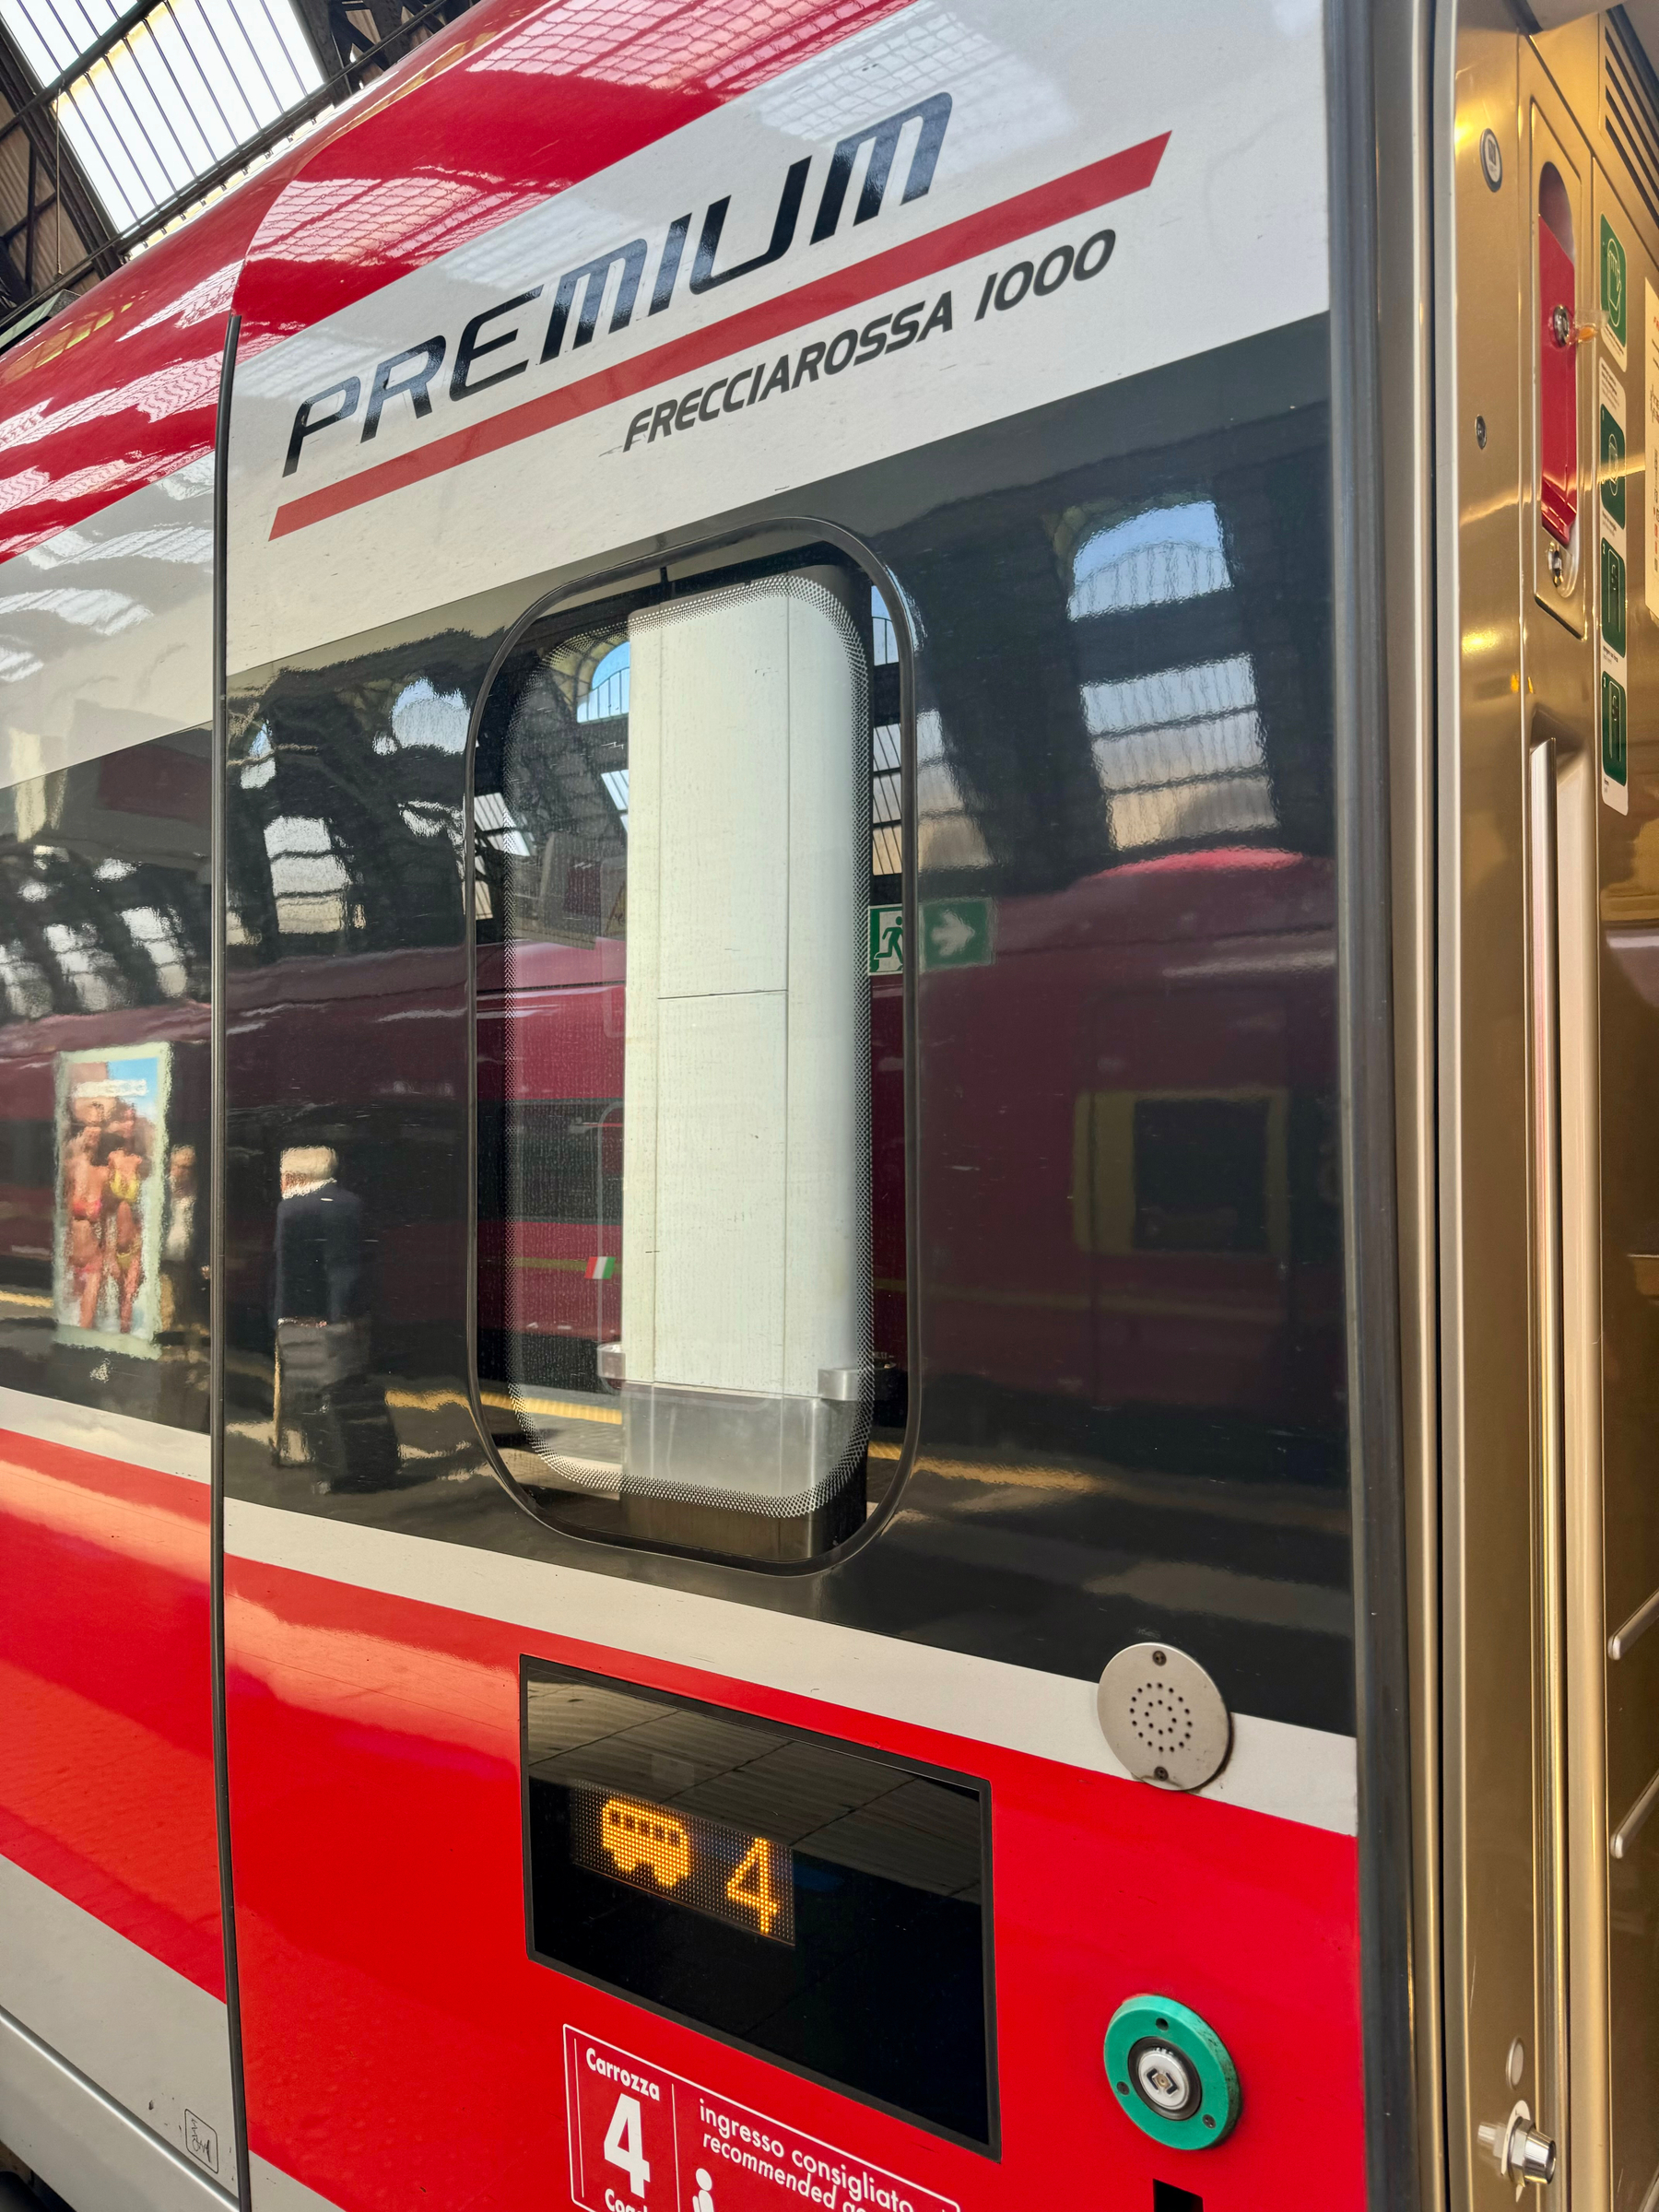 The image shows a Frecciarossa 1000 train labeled “PREMIUM” at a train station. The train’s window and carriage number 4 are visible. 